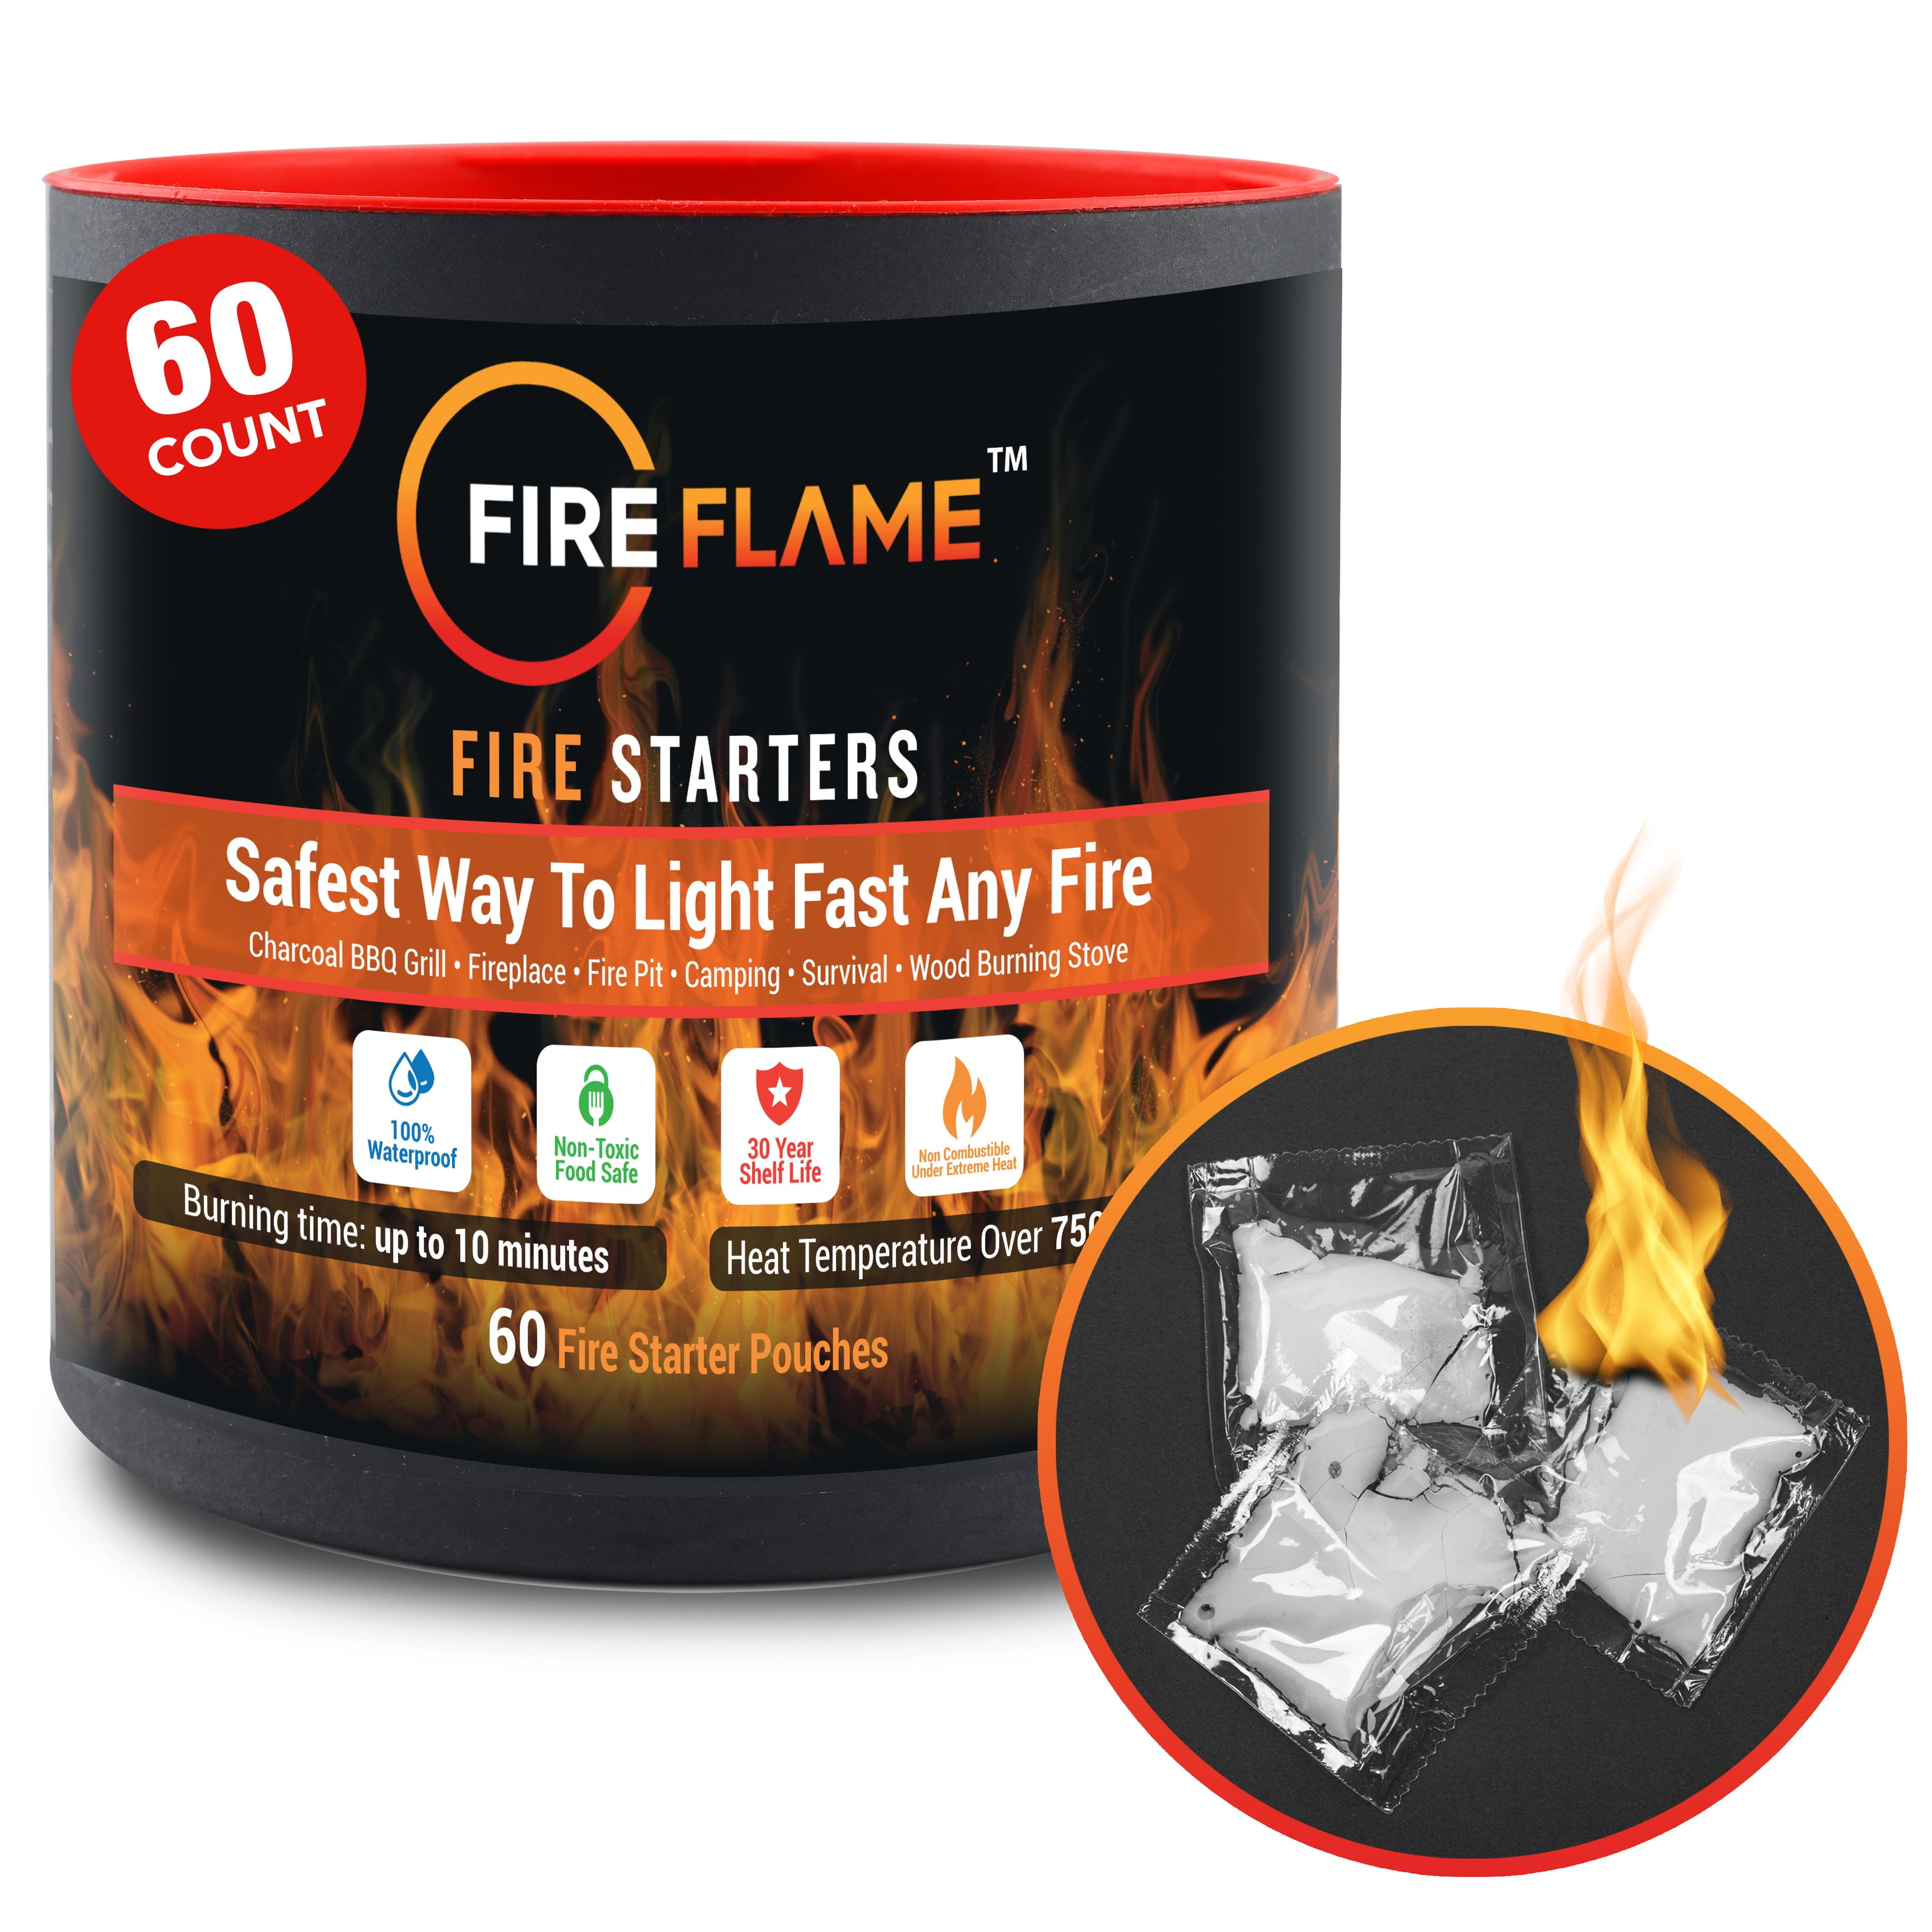 NATURAL Odourless Natural Firelighters for Home Fires & BBQ's Flamers Flame 